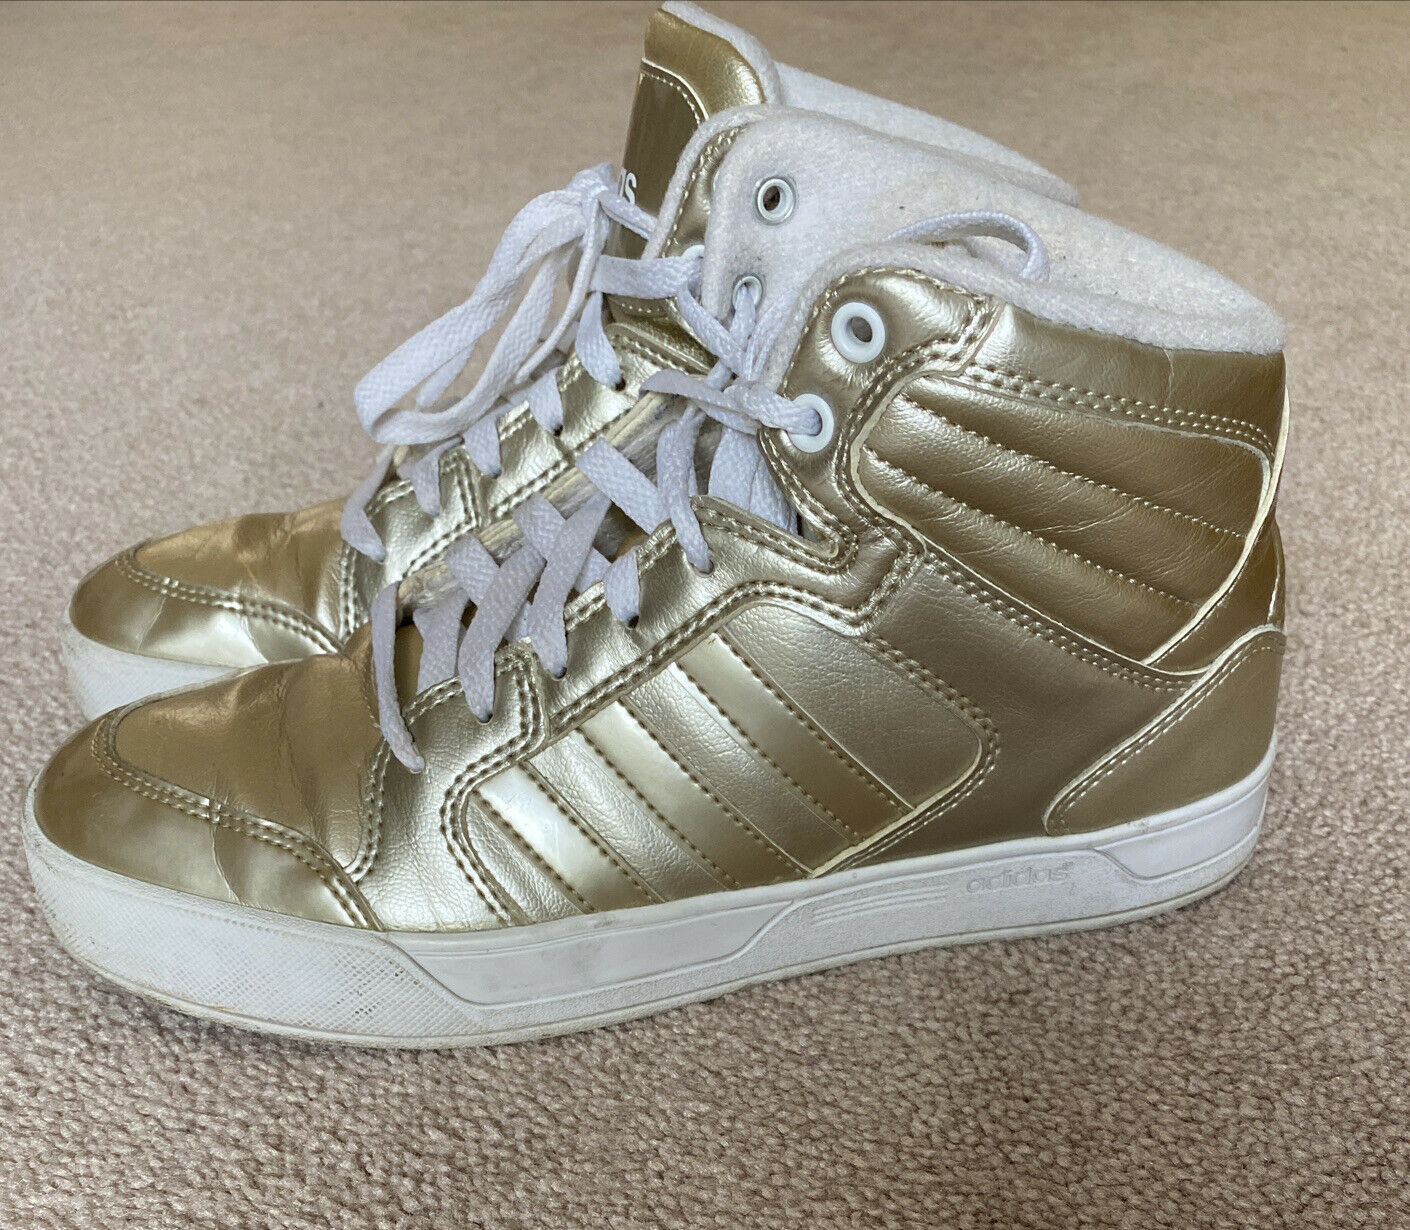 ADIDAS Neo Label Women's Sz 7 Gold High Top Sneakers Shoes